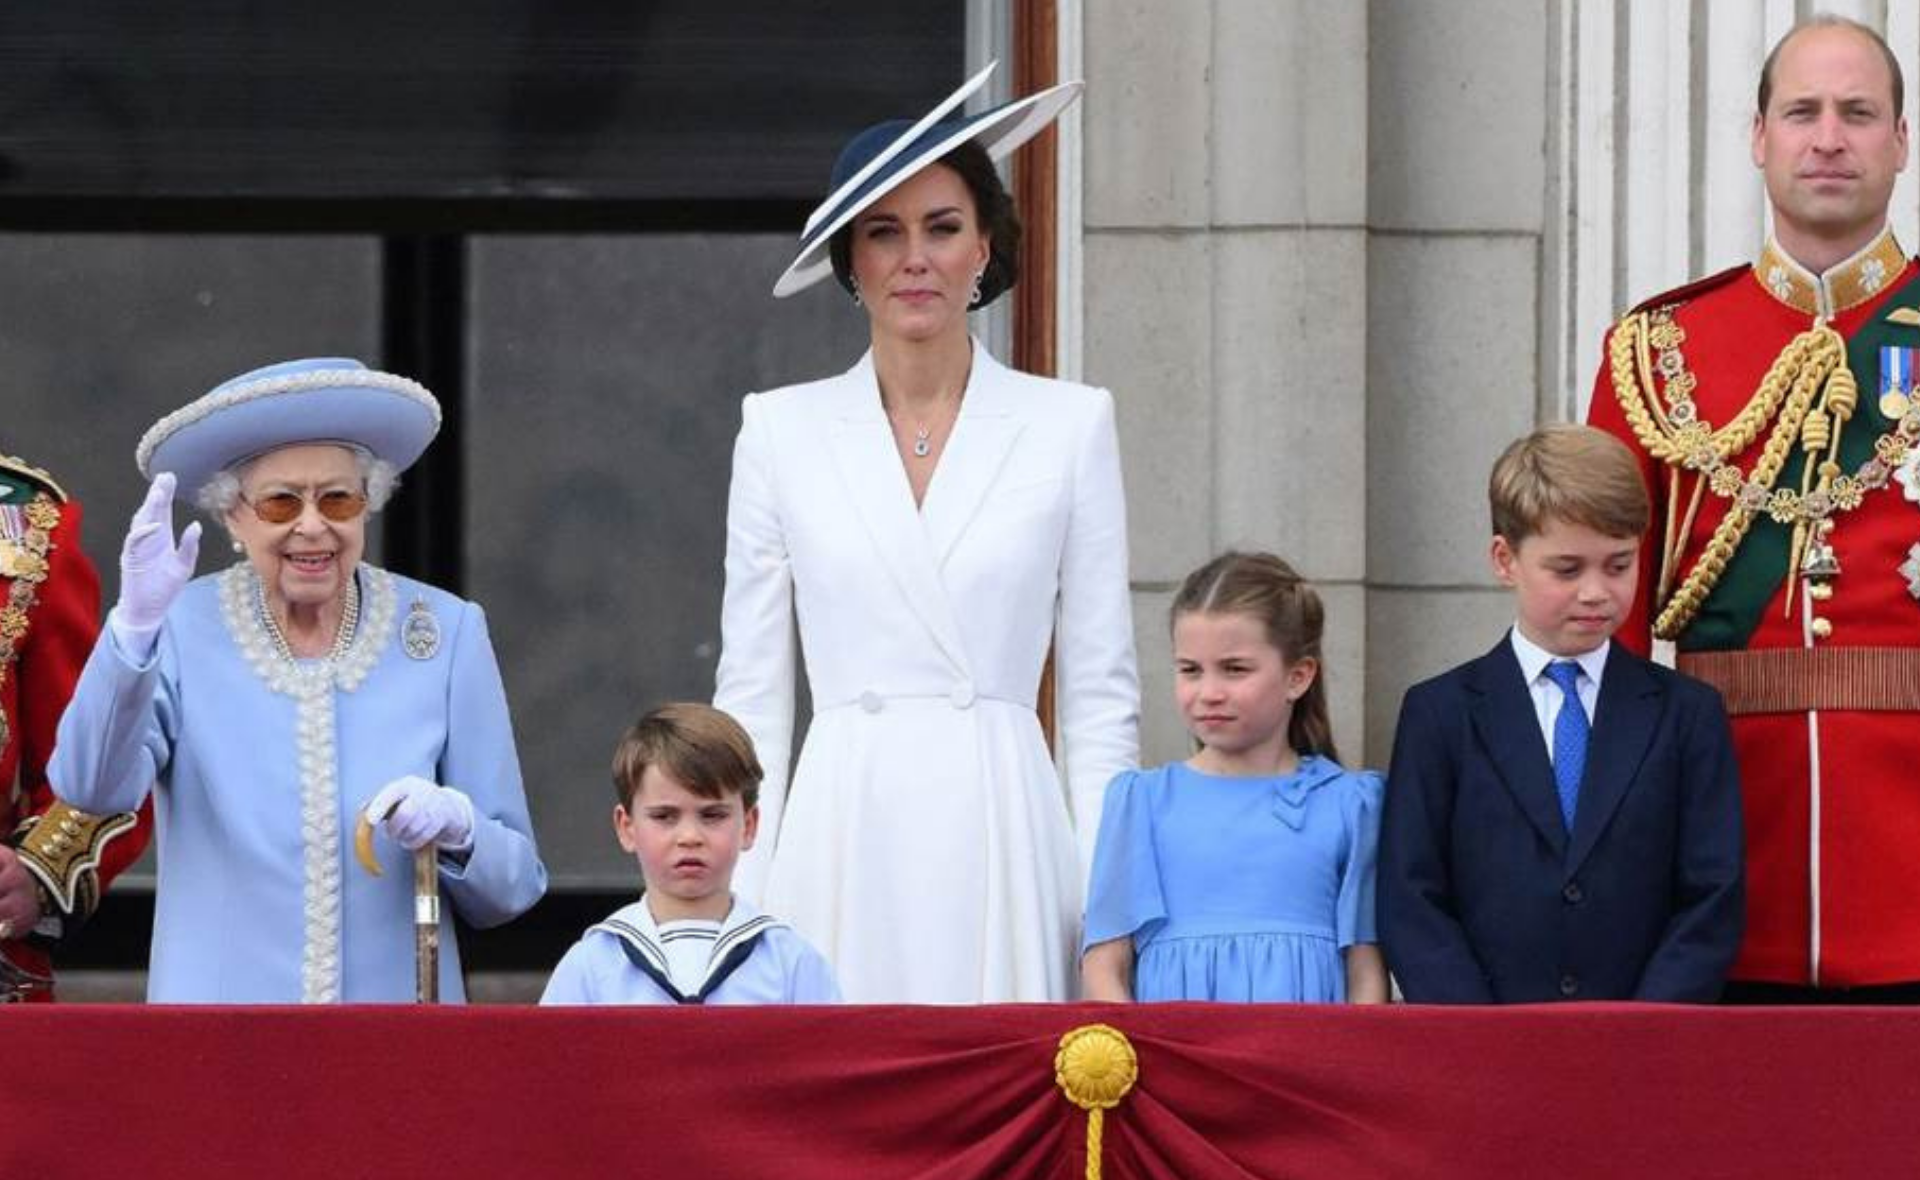 Balcony bonanza! The best photos of the Queen’s Platinum Jubilee Trooping the Colour celebrations